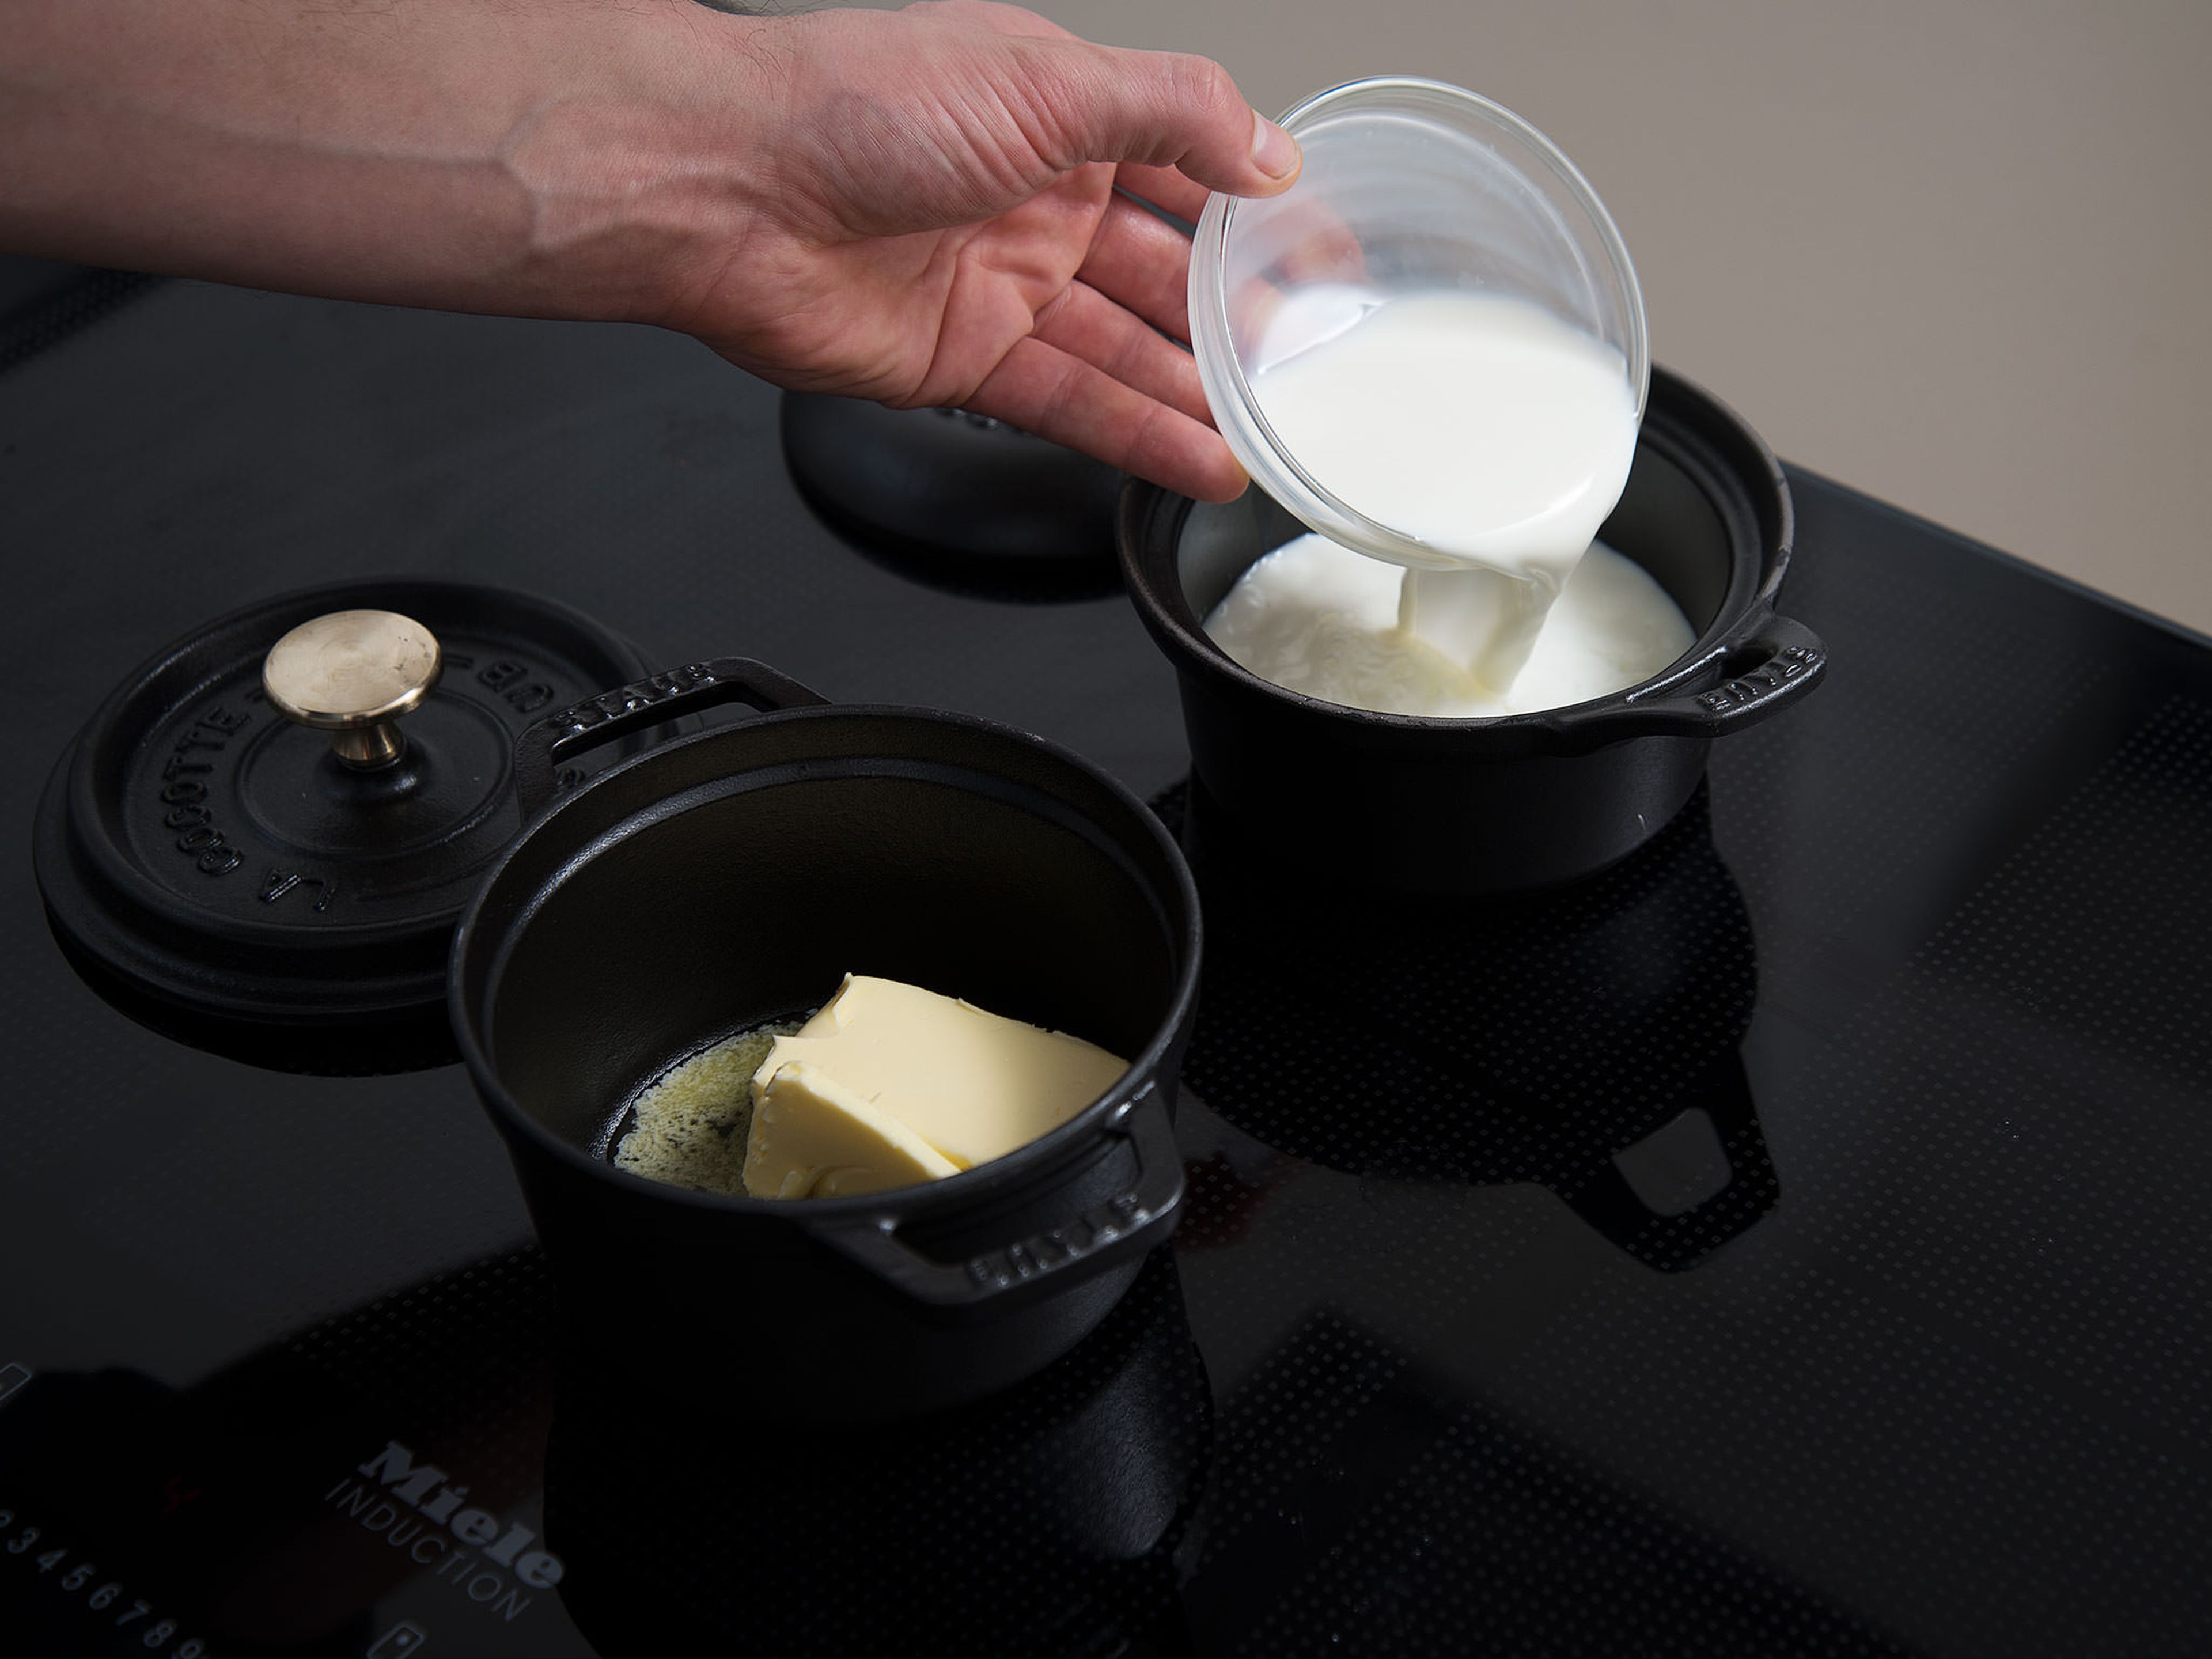 Heat milk and water in a small pot set over medium-low heat. Add yeast and stir to combine. Melt butter in another small pot on medium-low heat. Add flour and salt to a large bowl and form a well in the middle.